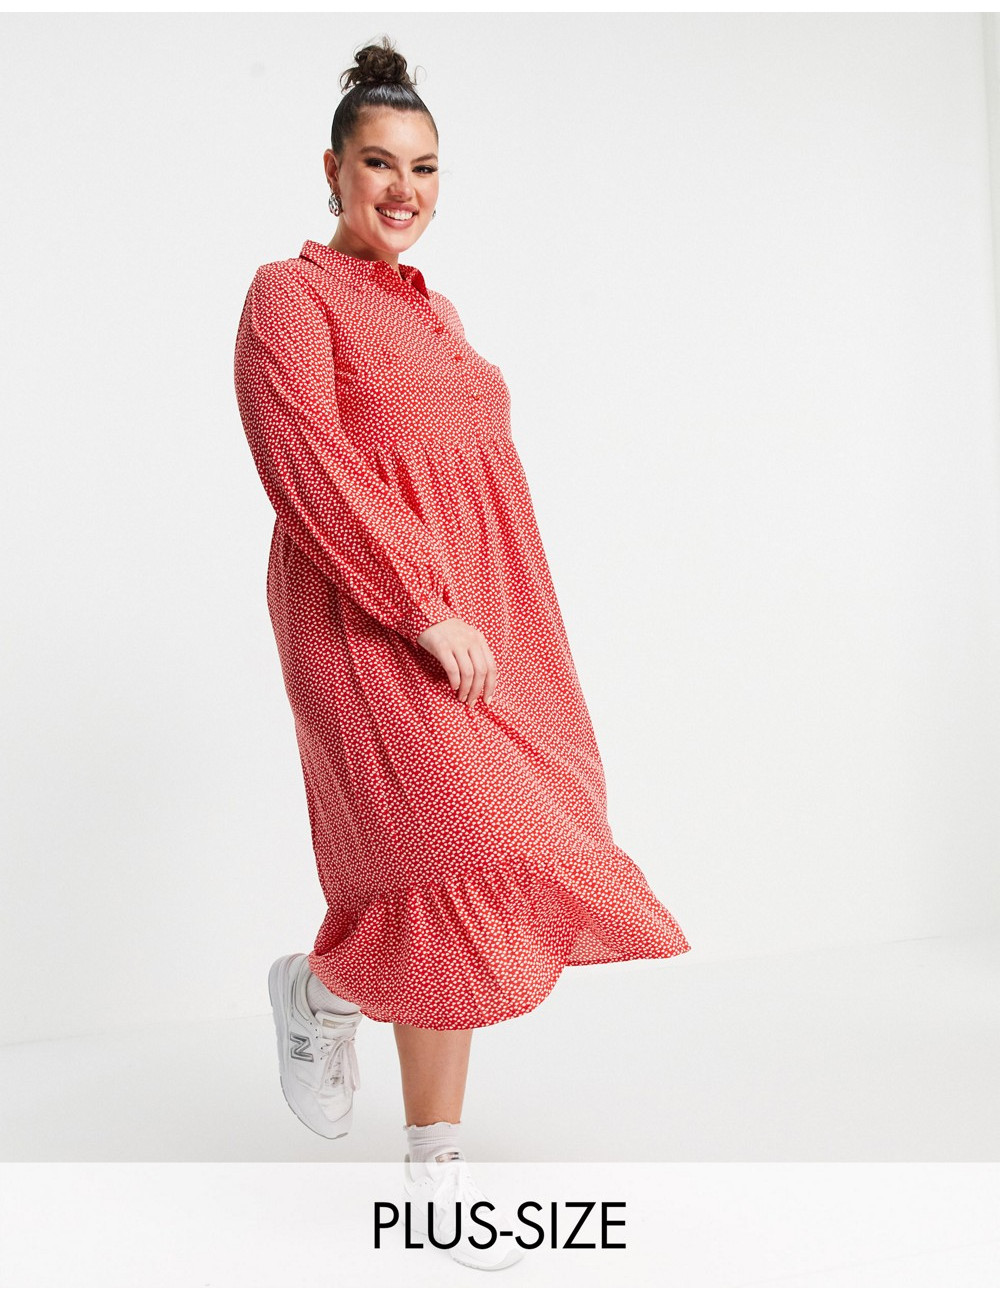 Yours shirt midi dress in...